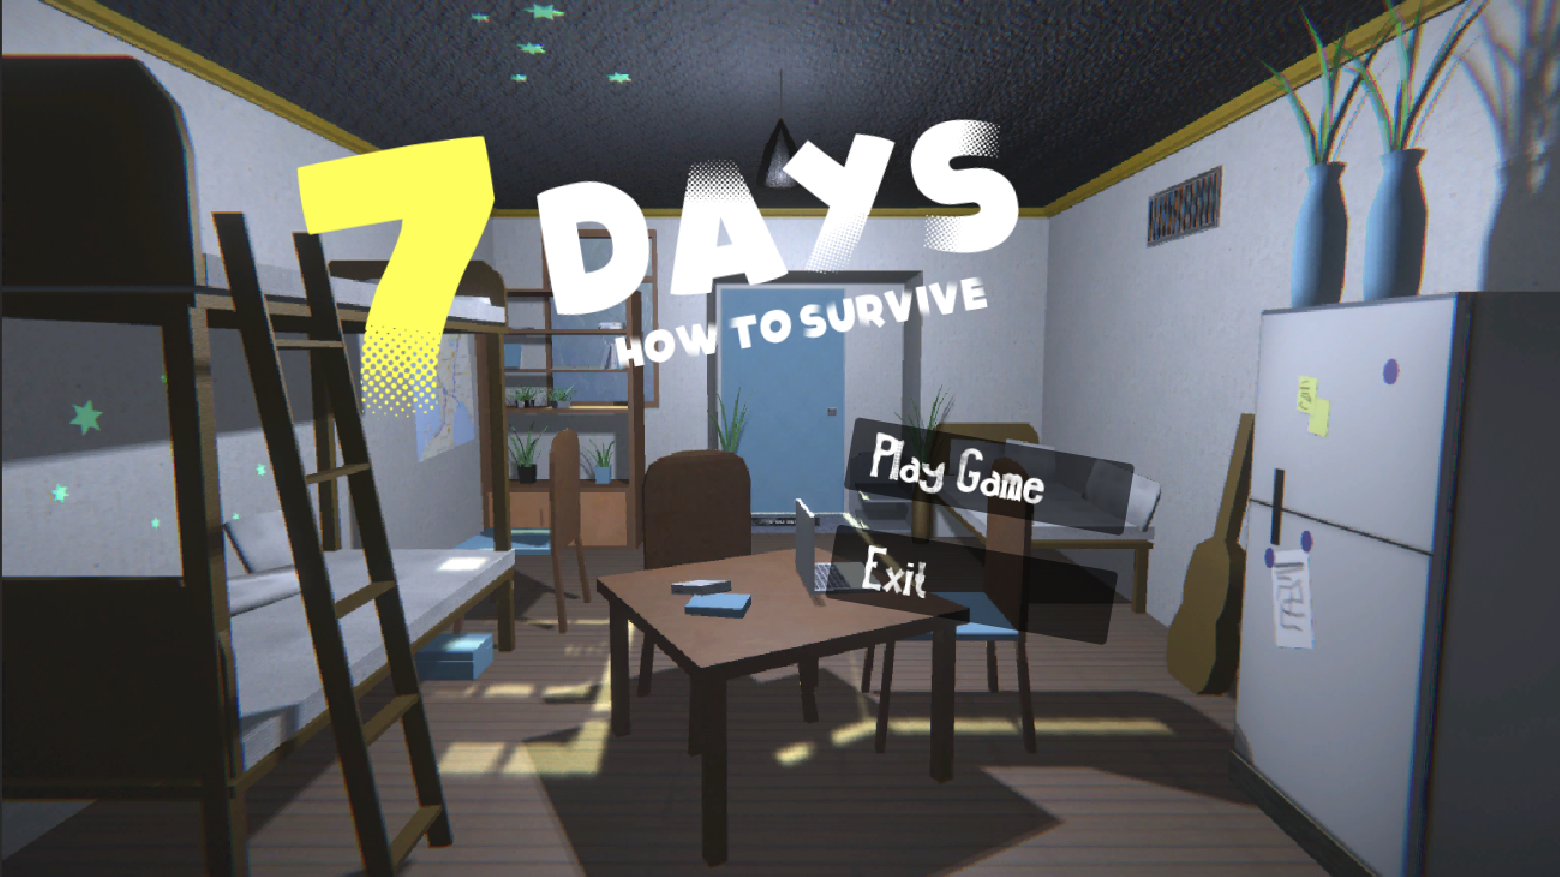 7 Days: How to Survive